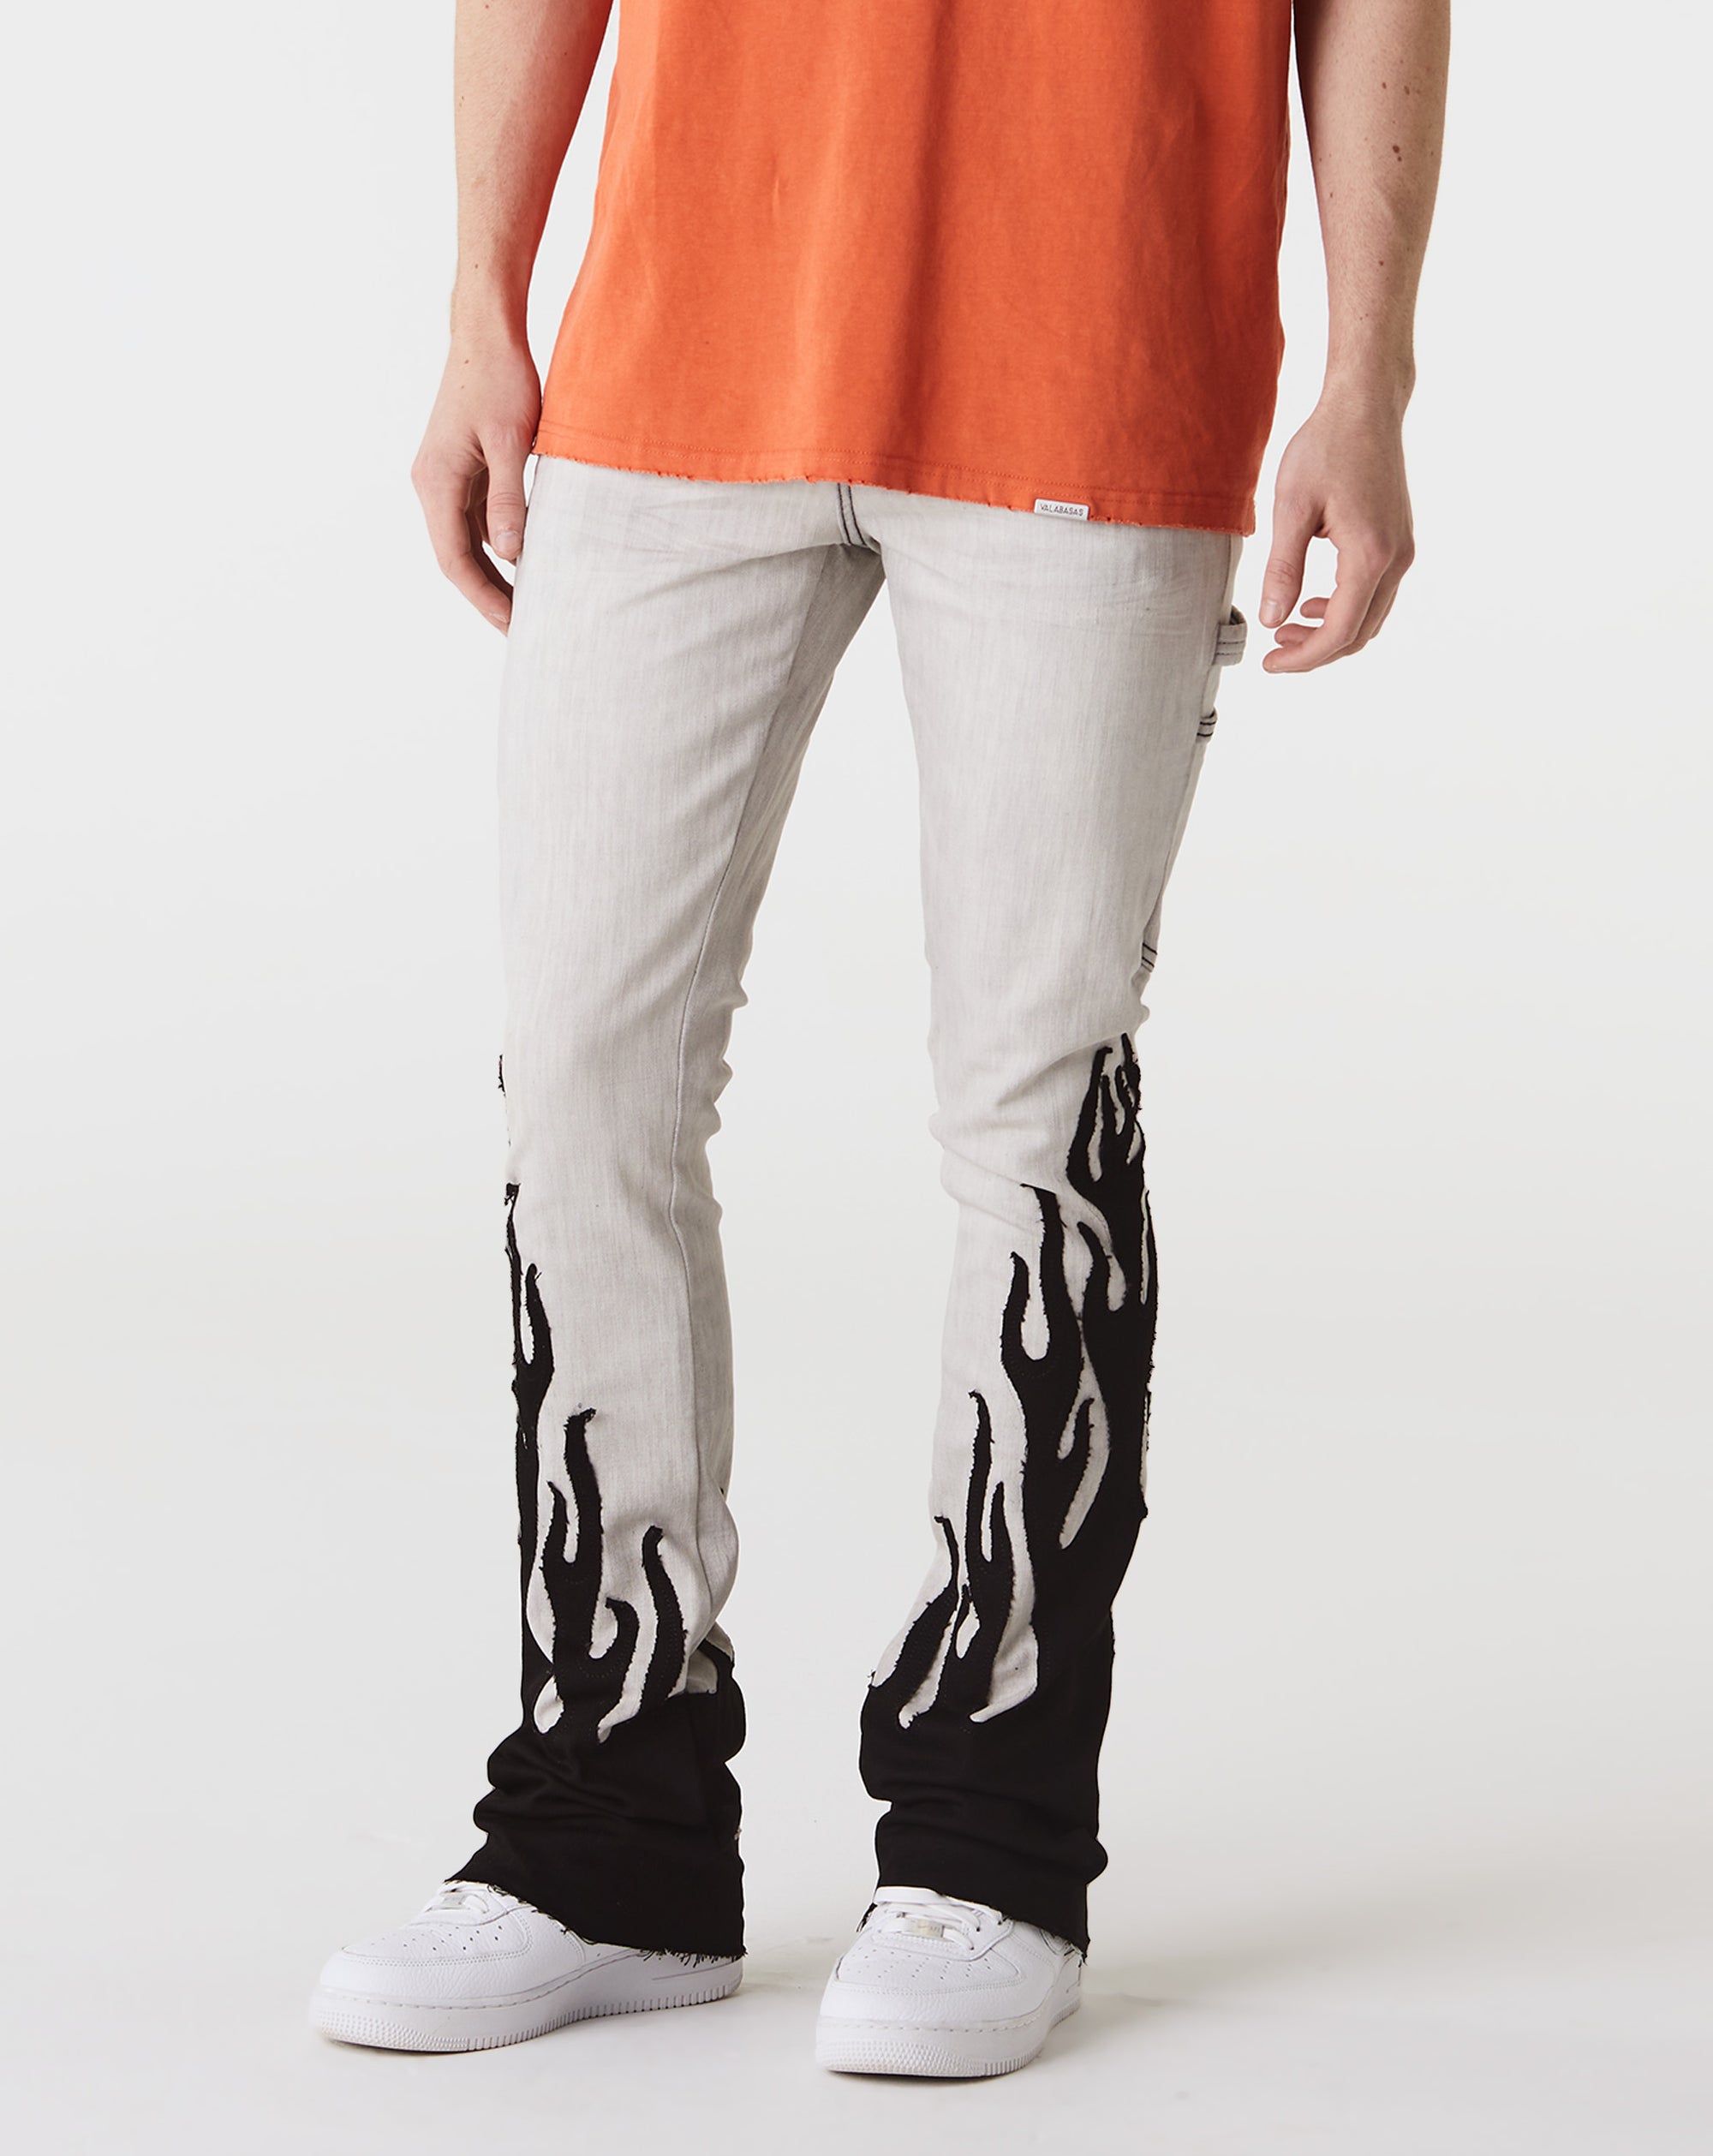 VALABASAS Flare Stacked Denim - Rule of Next Apparel